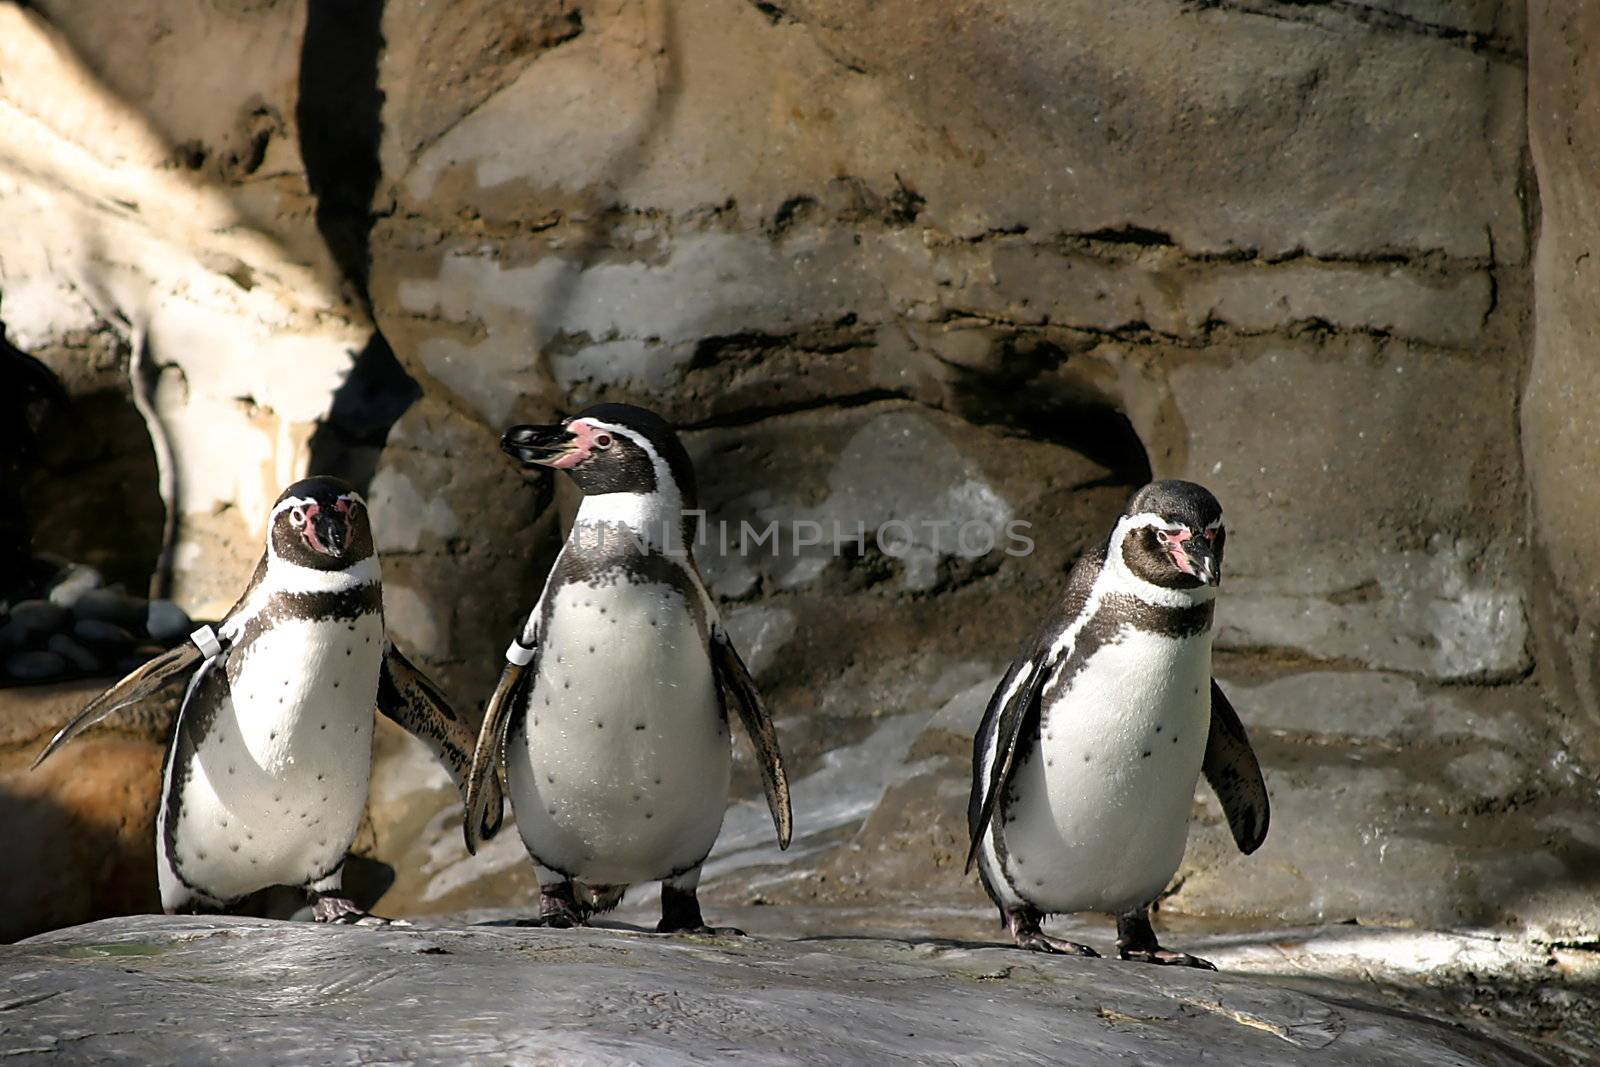 The Humboldt Penguins is a South American penguin, breeding in coastal Peru and Chile.